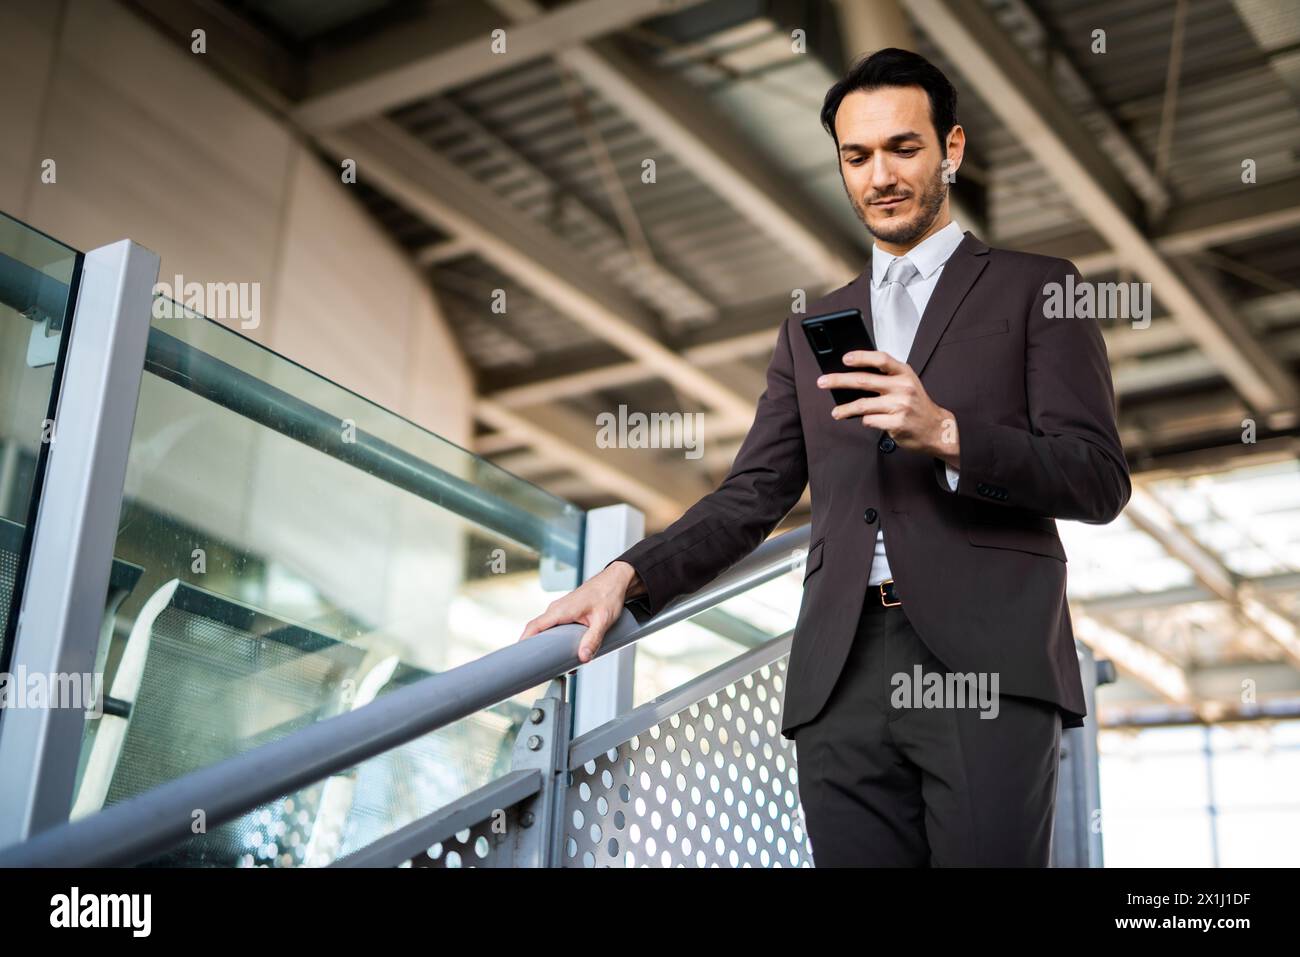 Young professional man using mobile phone while waiting at a modern train station platform Stock Photo